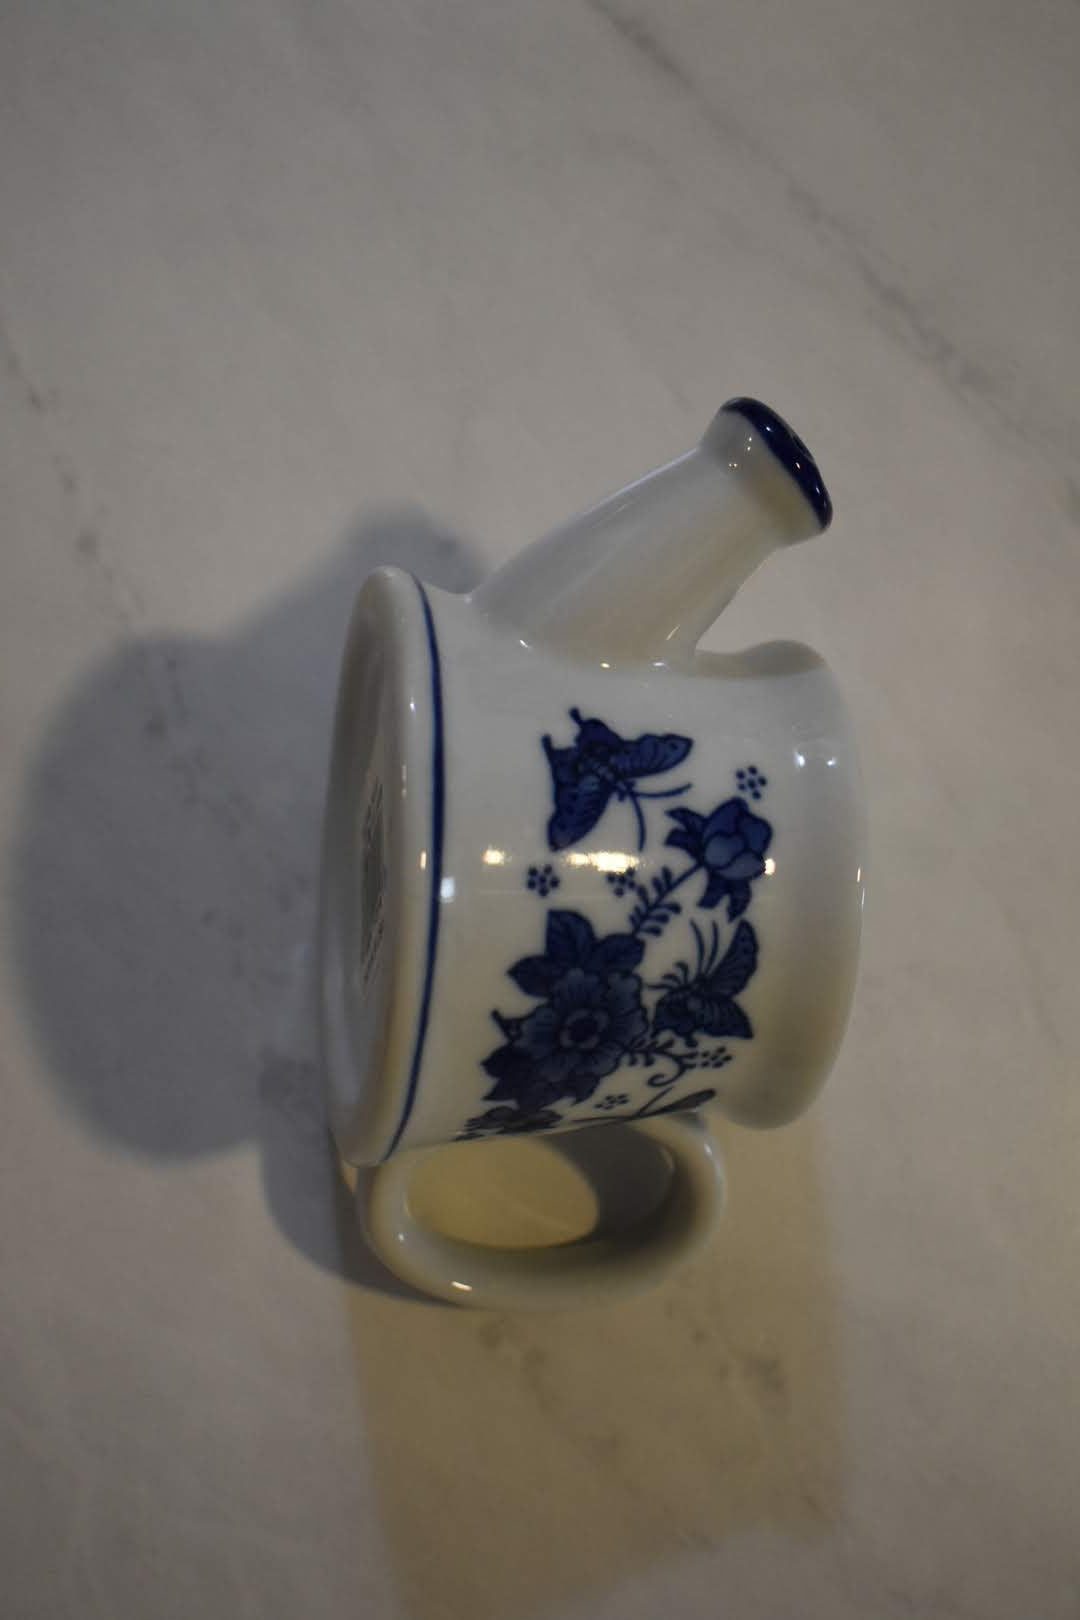 Blue White Floral Design - Ceramic Porcelain Oriental - Mid Century Mini Watering Can - Wall Decor - Table Decor